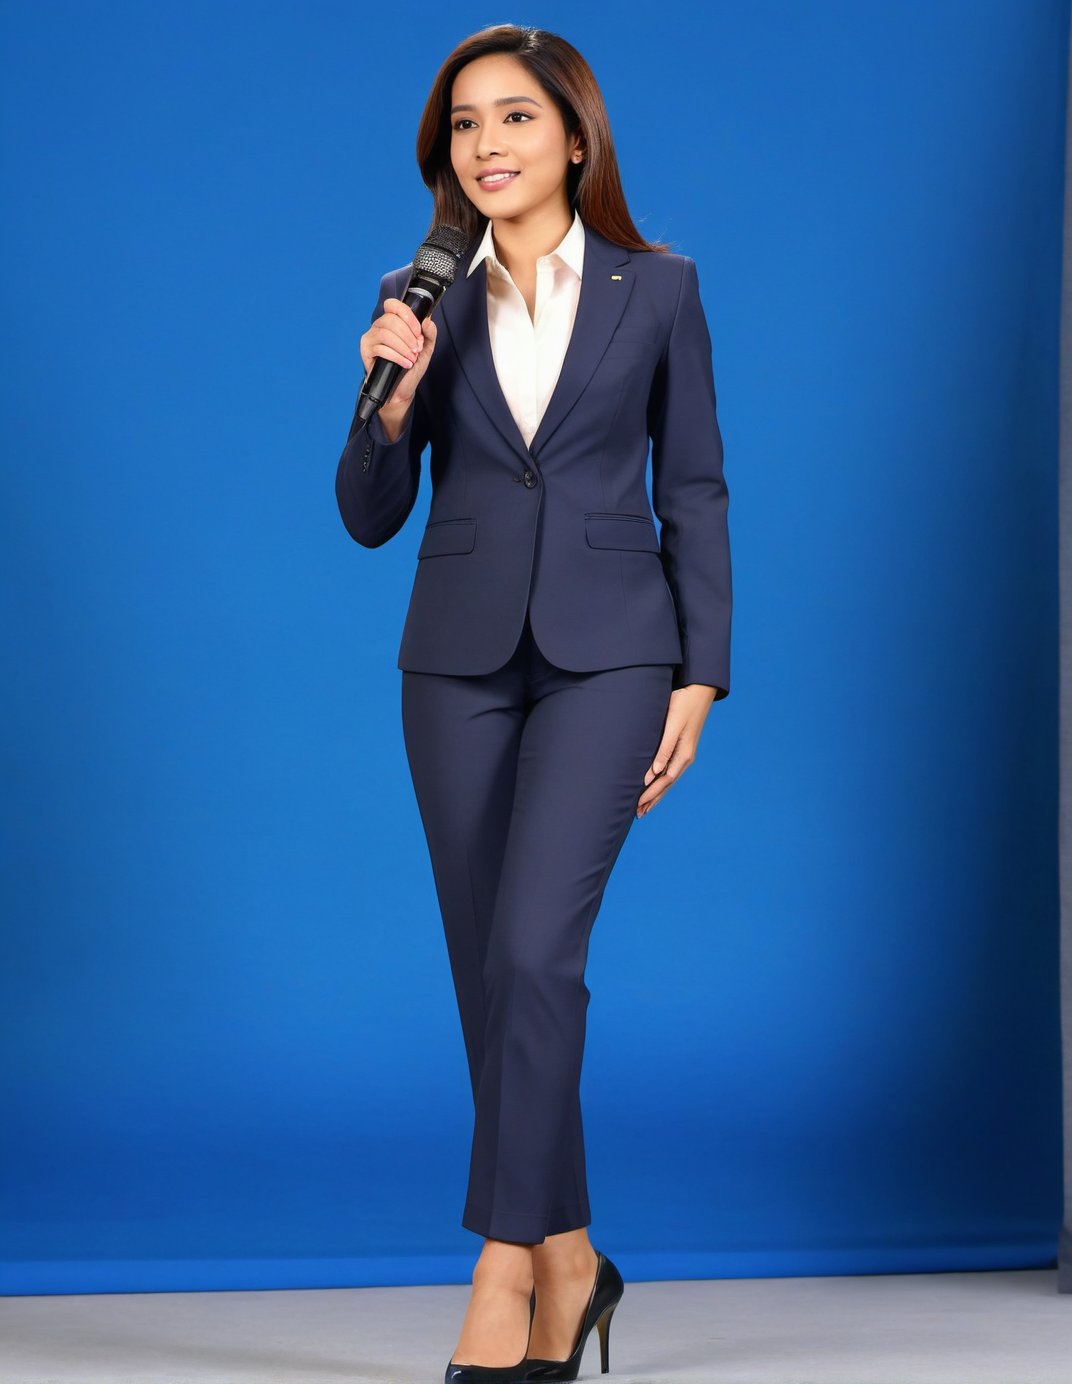 a girl like nora fatahi wear  office suit and having a mic in hand and do public speaking  and 
 short full on her full body and shoes in legs   nauty pose and hands should be in back hand, single body make him more realistic. zoom out on her face near camera and giving pose
elegent,four finger and 1 thumb in each hand and good hand and finger
